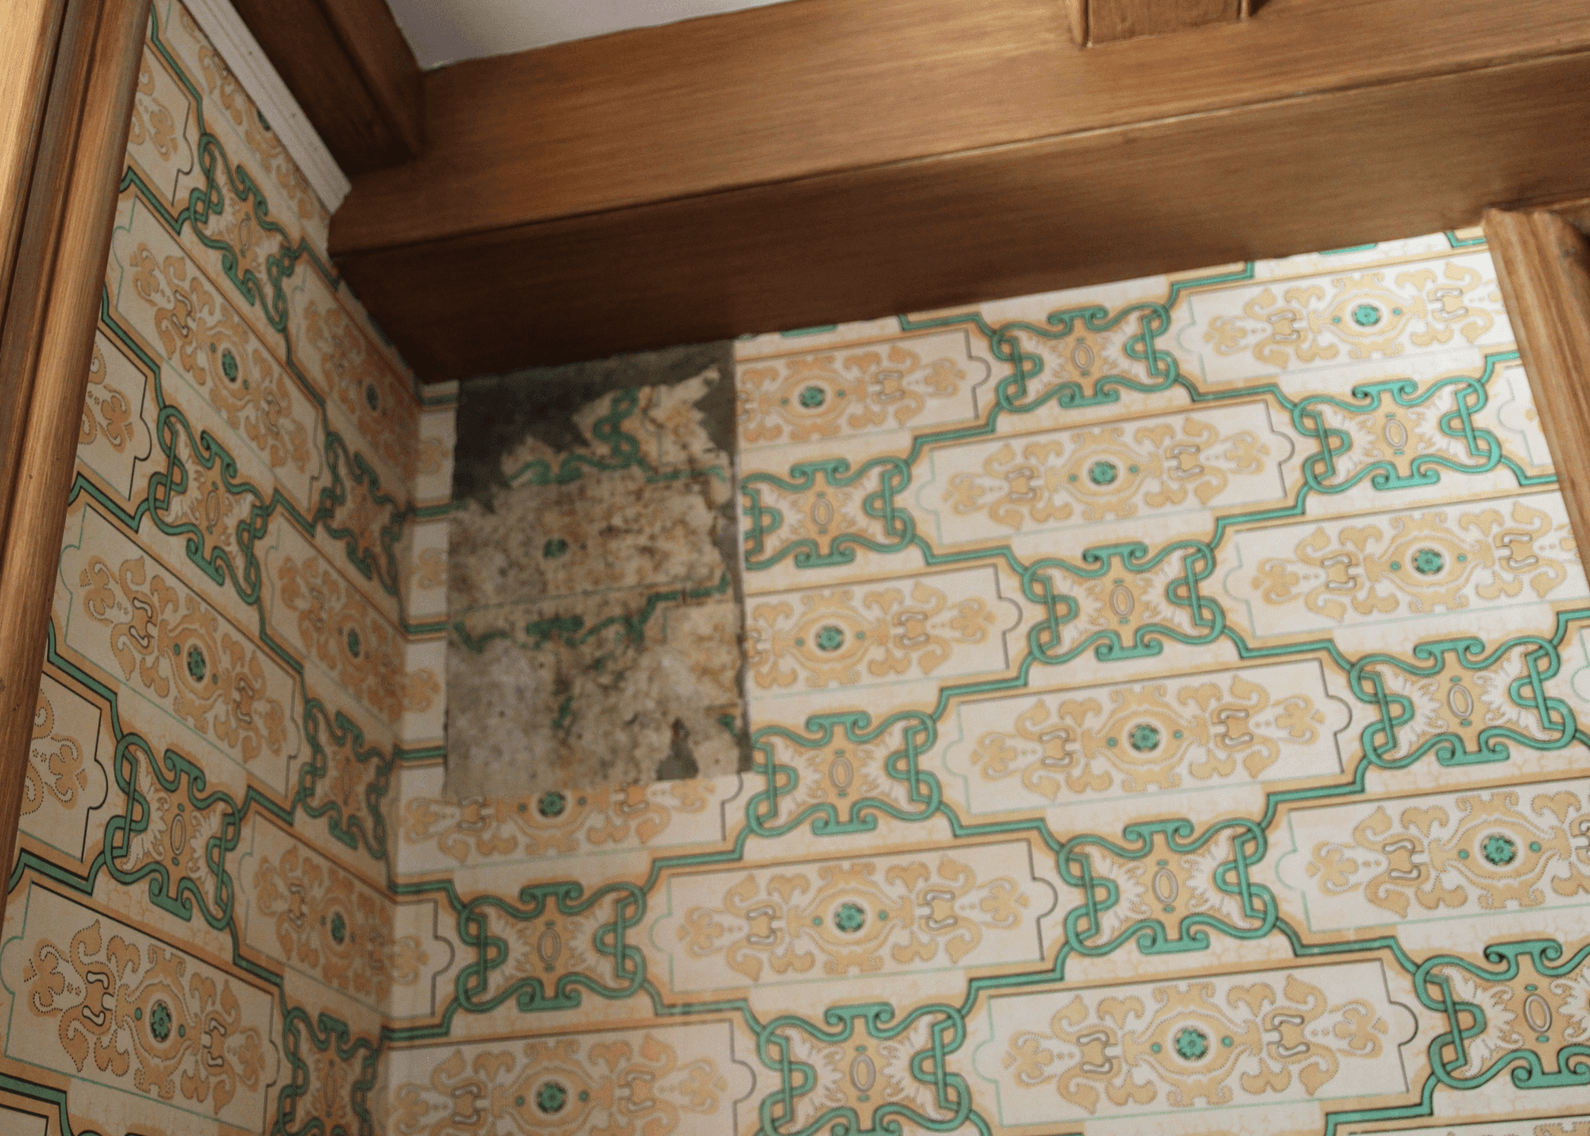 A small patch of the original wallpaper is visible in a corner of the museum café. Photo: Leslie Yager